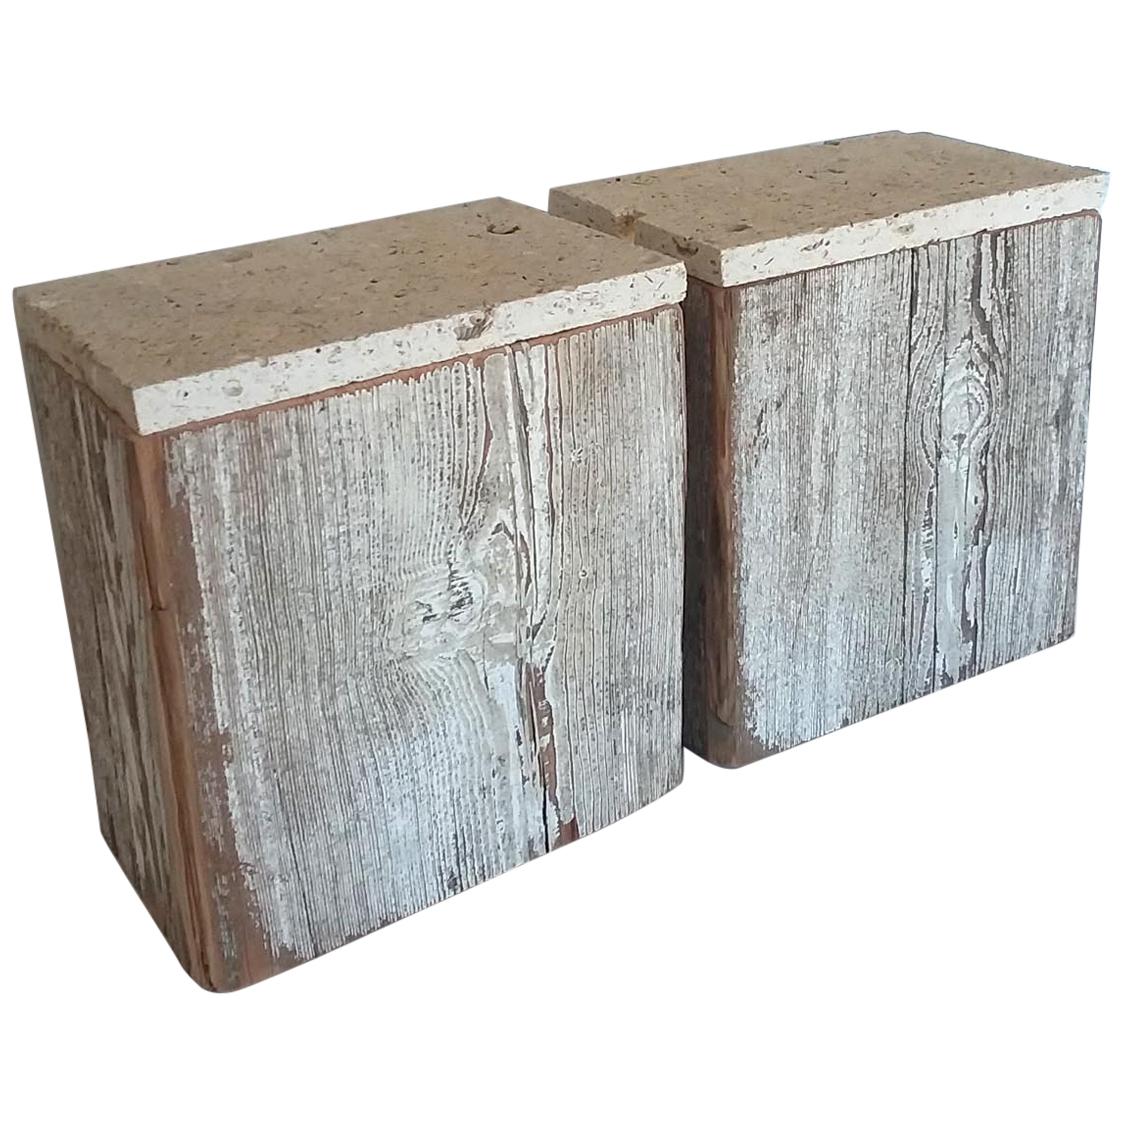 Pair of Reclaimed Wood Side Table with Limestone Tops